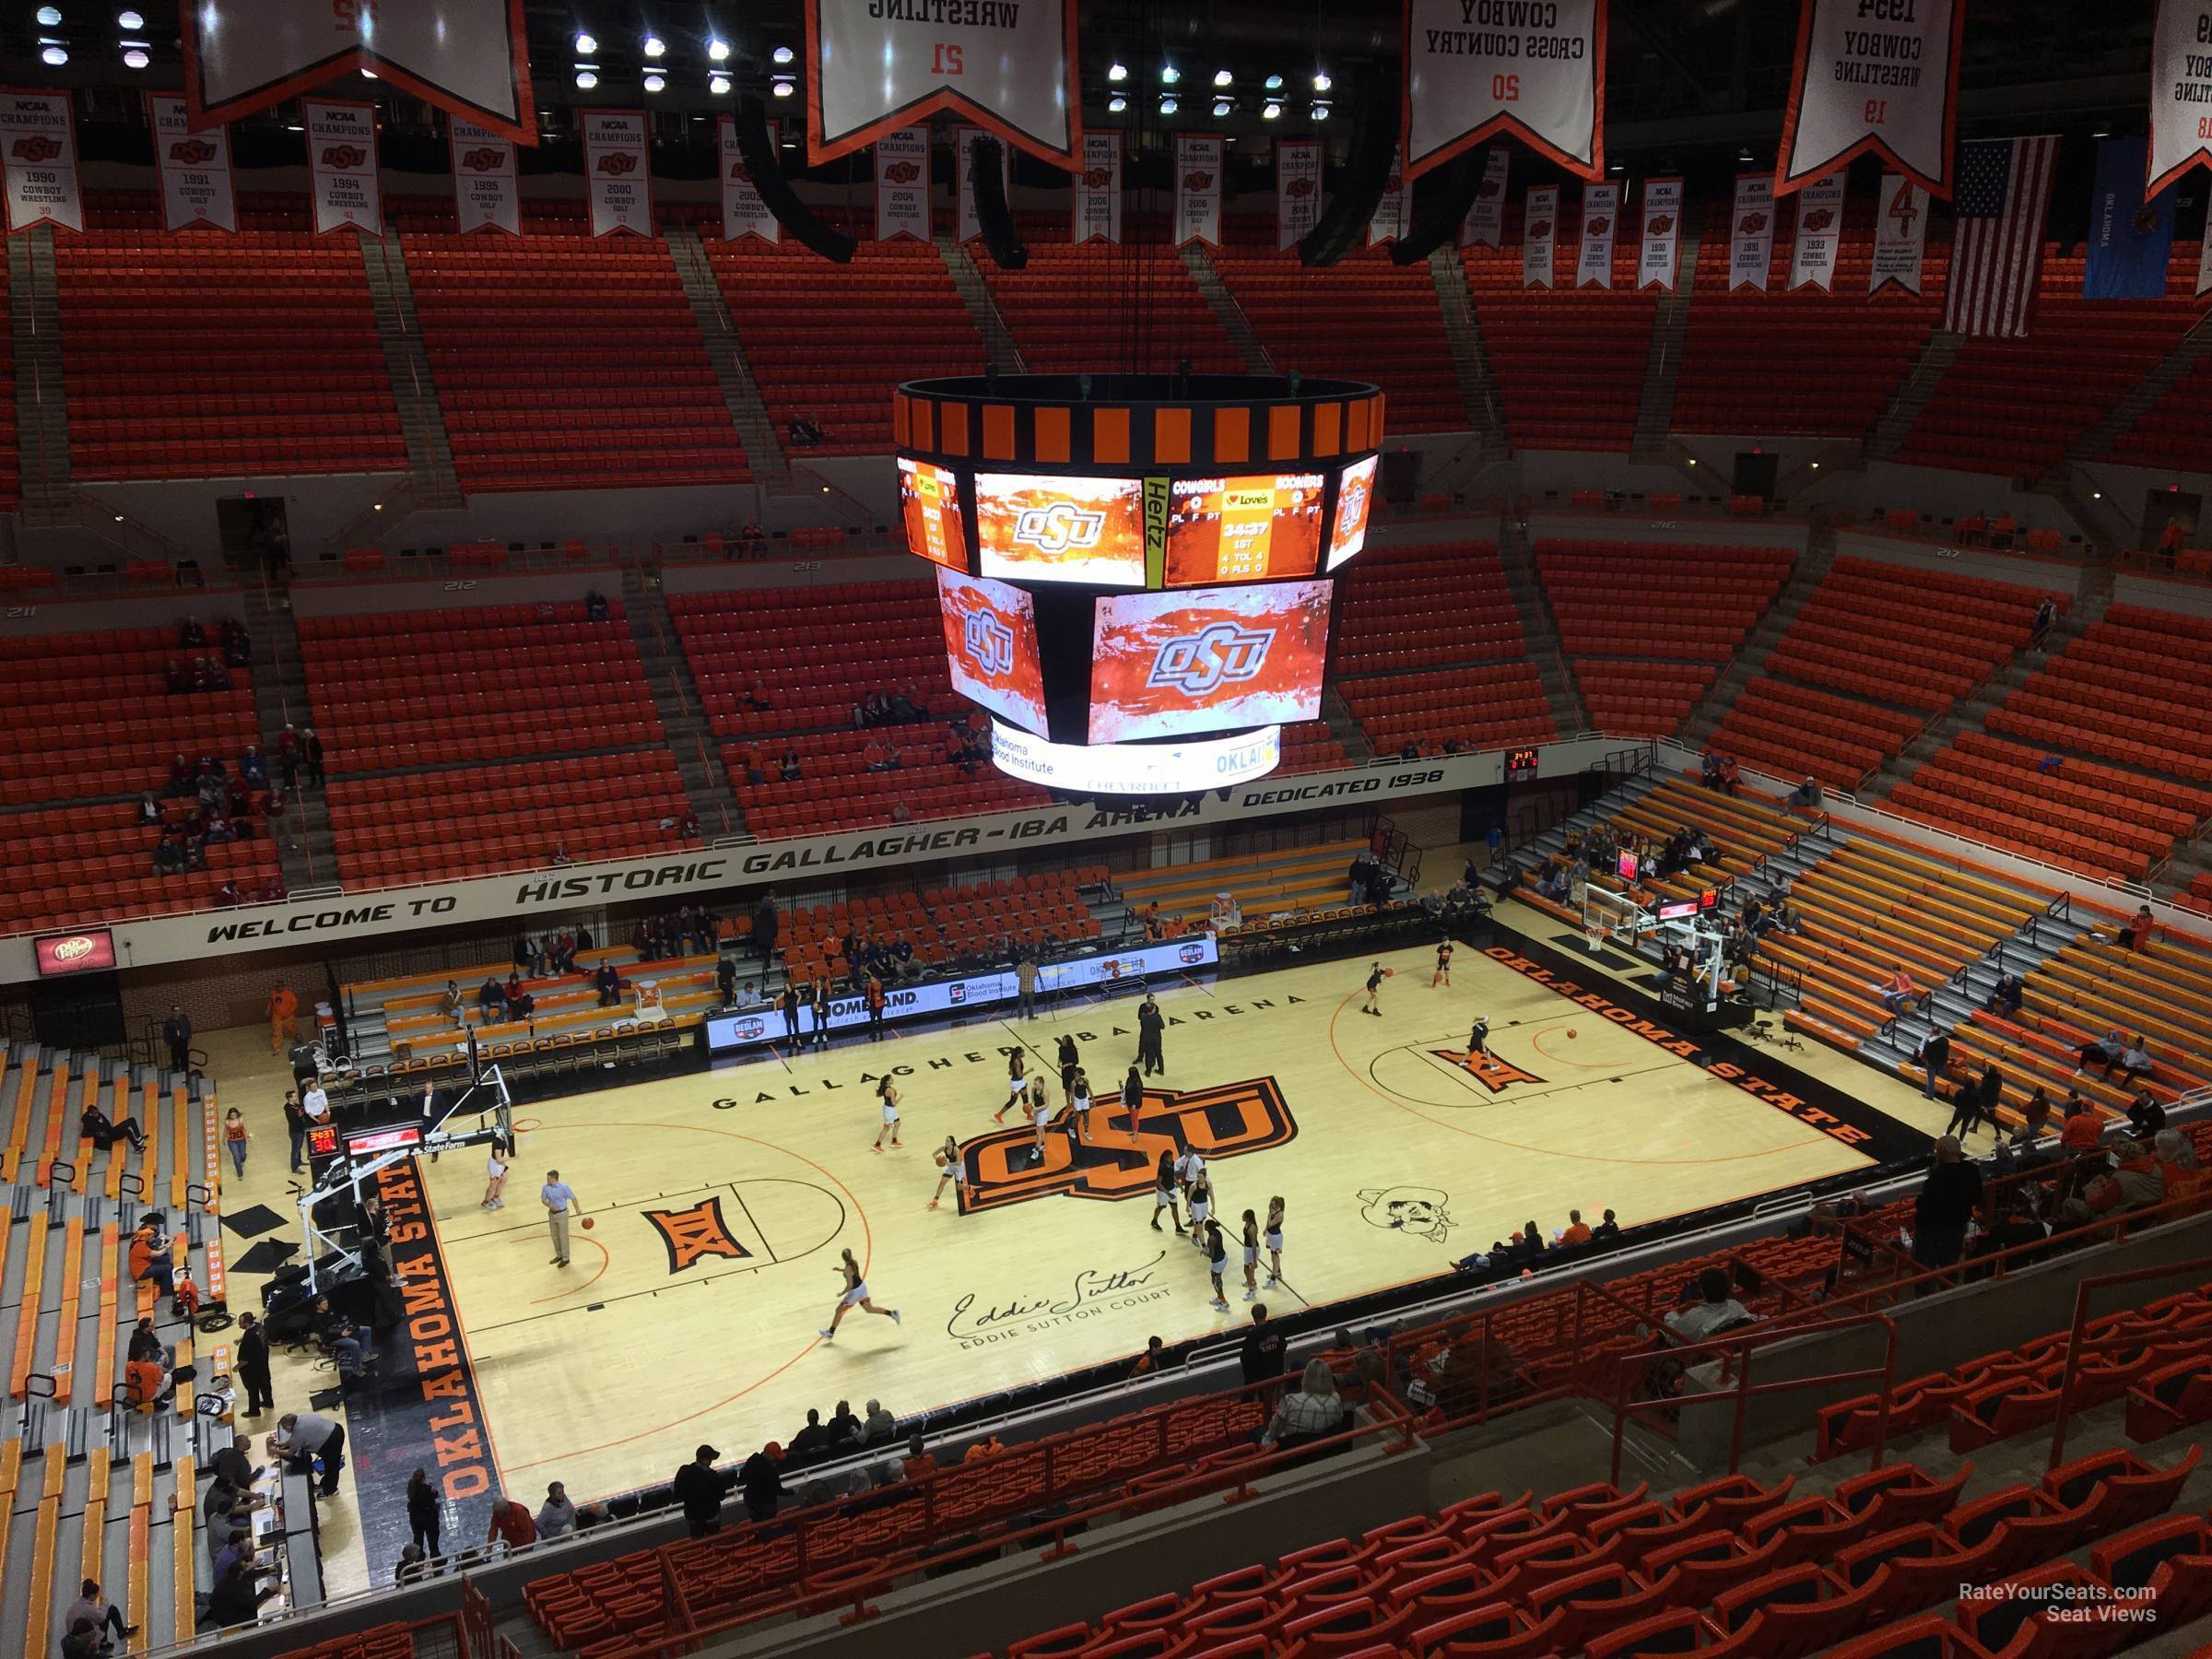 section 305, row 10 seat view  - gallagher-iba arena